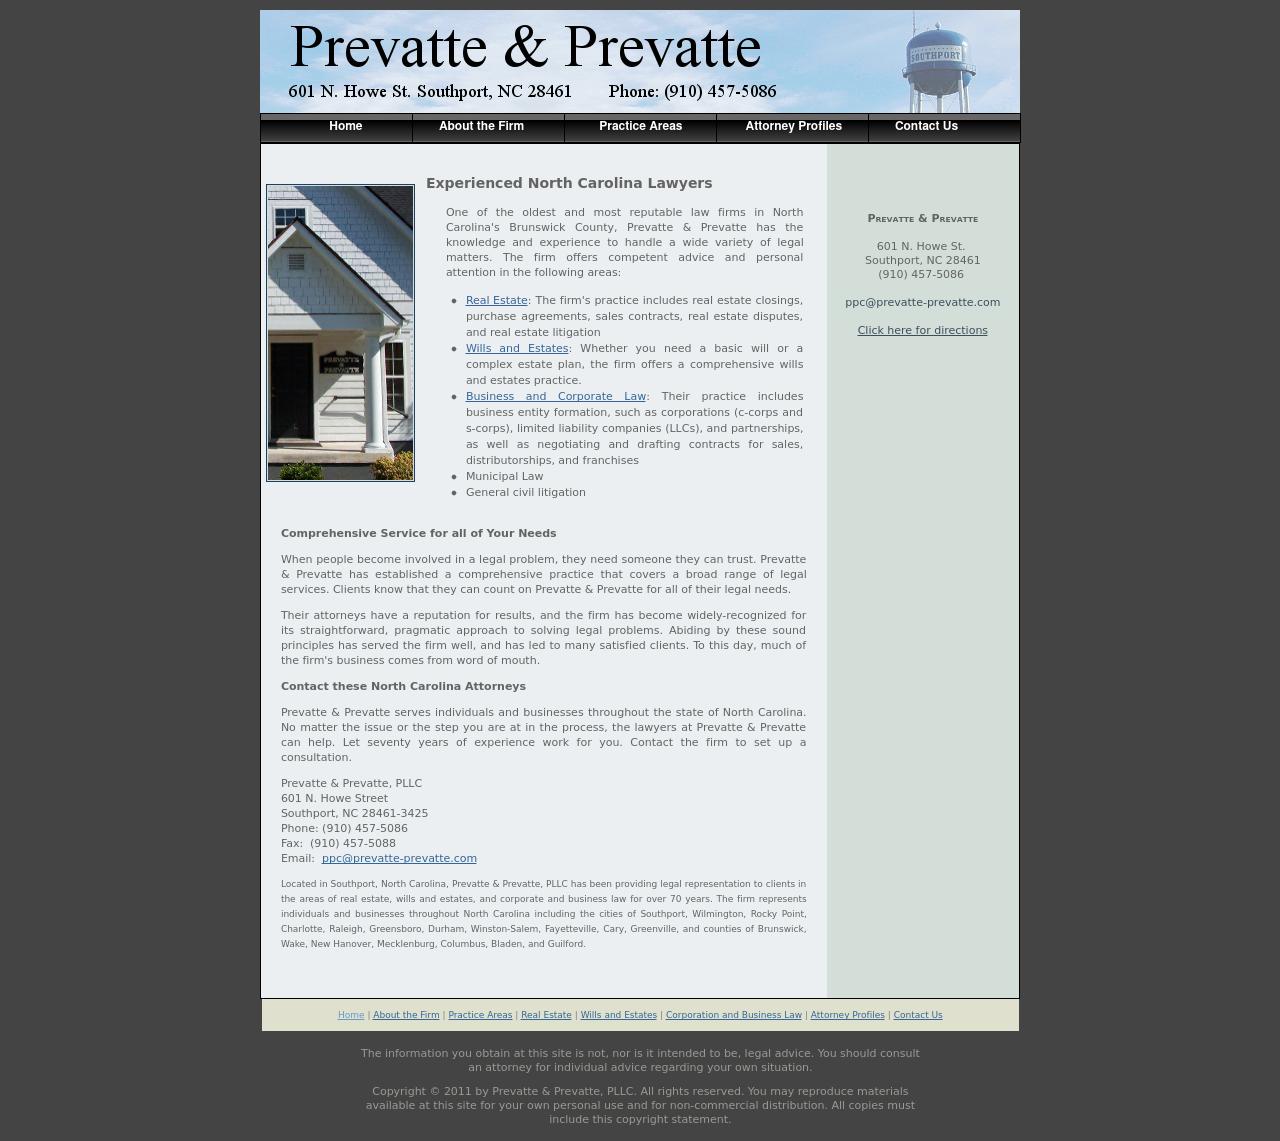 Prevatte & Prevatte PLLC - Southport NC Lawyers